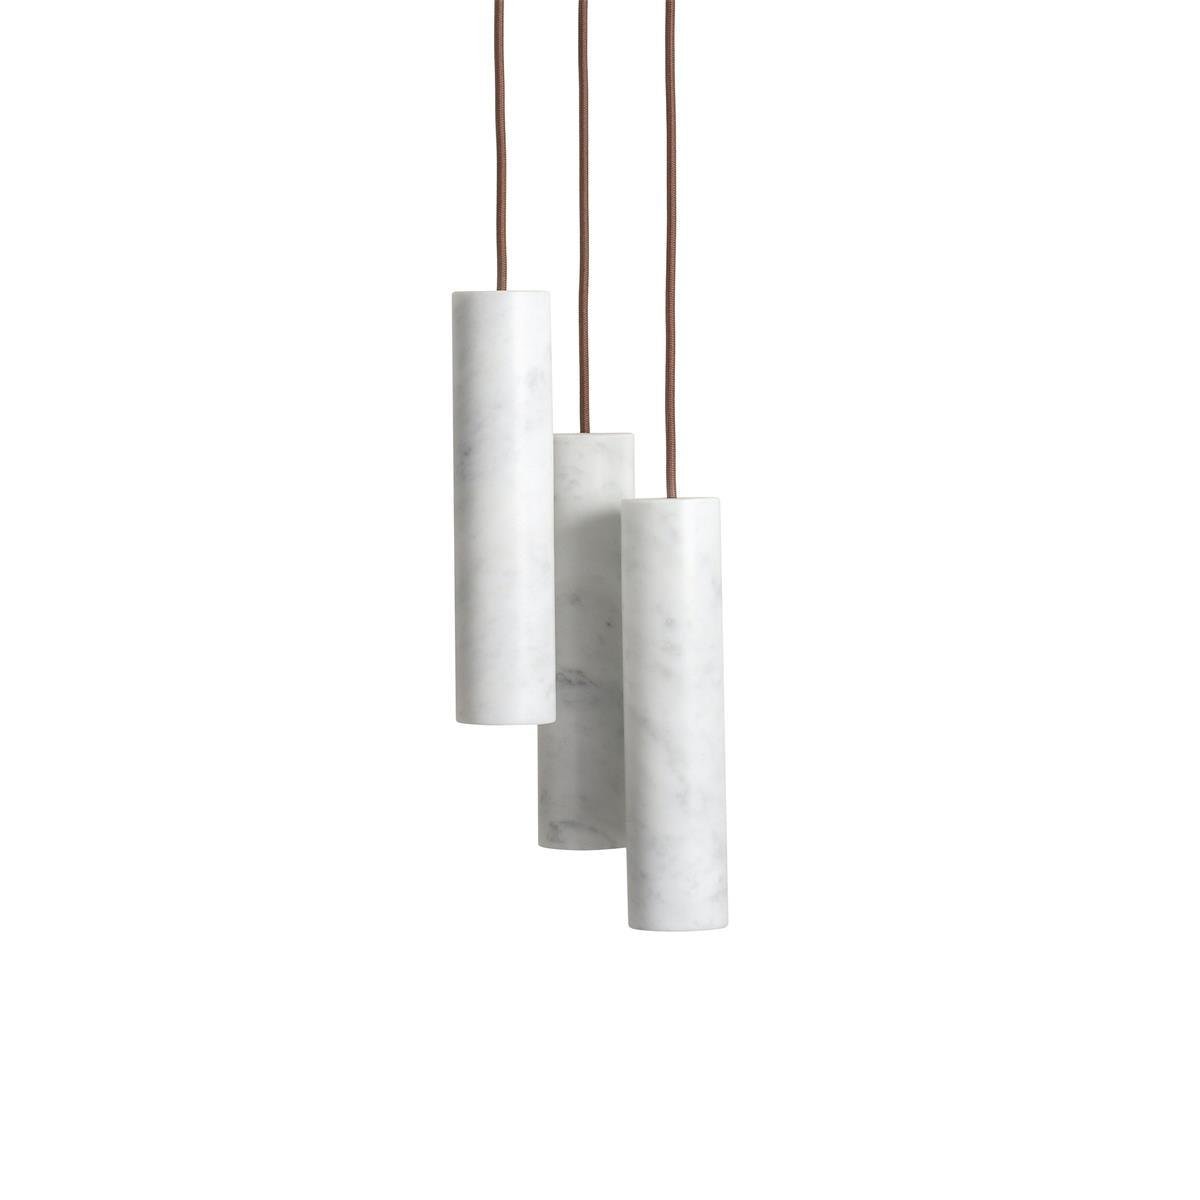 White Silo Pendant Light with 3 Heads, measuring 7.9 inches in diameter and standing 59 inches tall (20cm x 150cm).